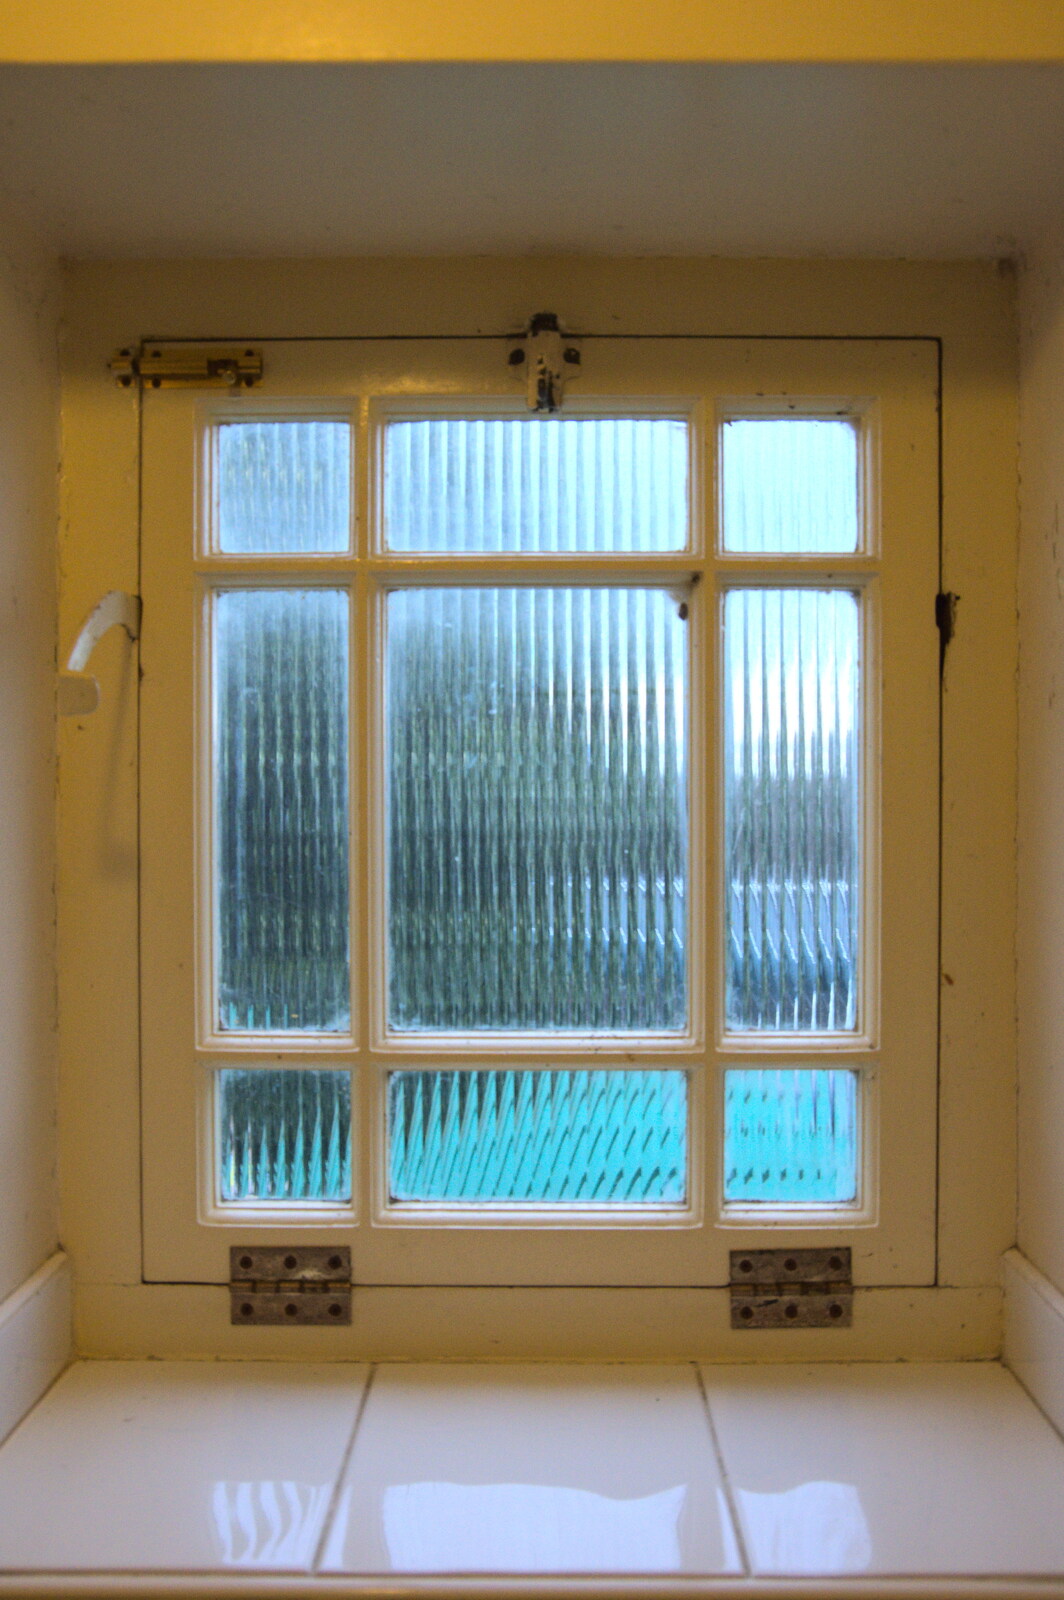 The gents' bog window in the Nelson Head from To See the Seals, Horsey Gap, Norfolk - 10th January 2020